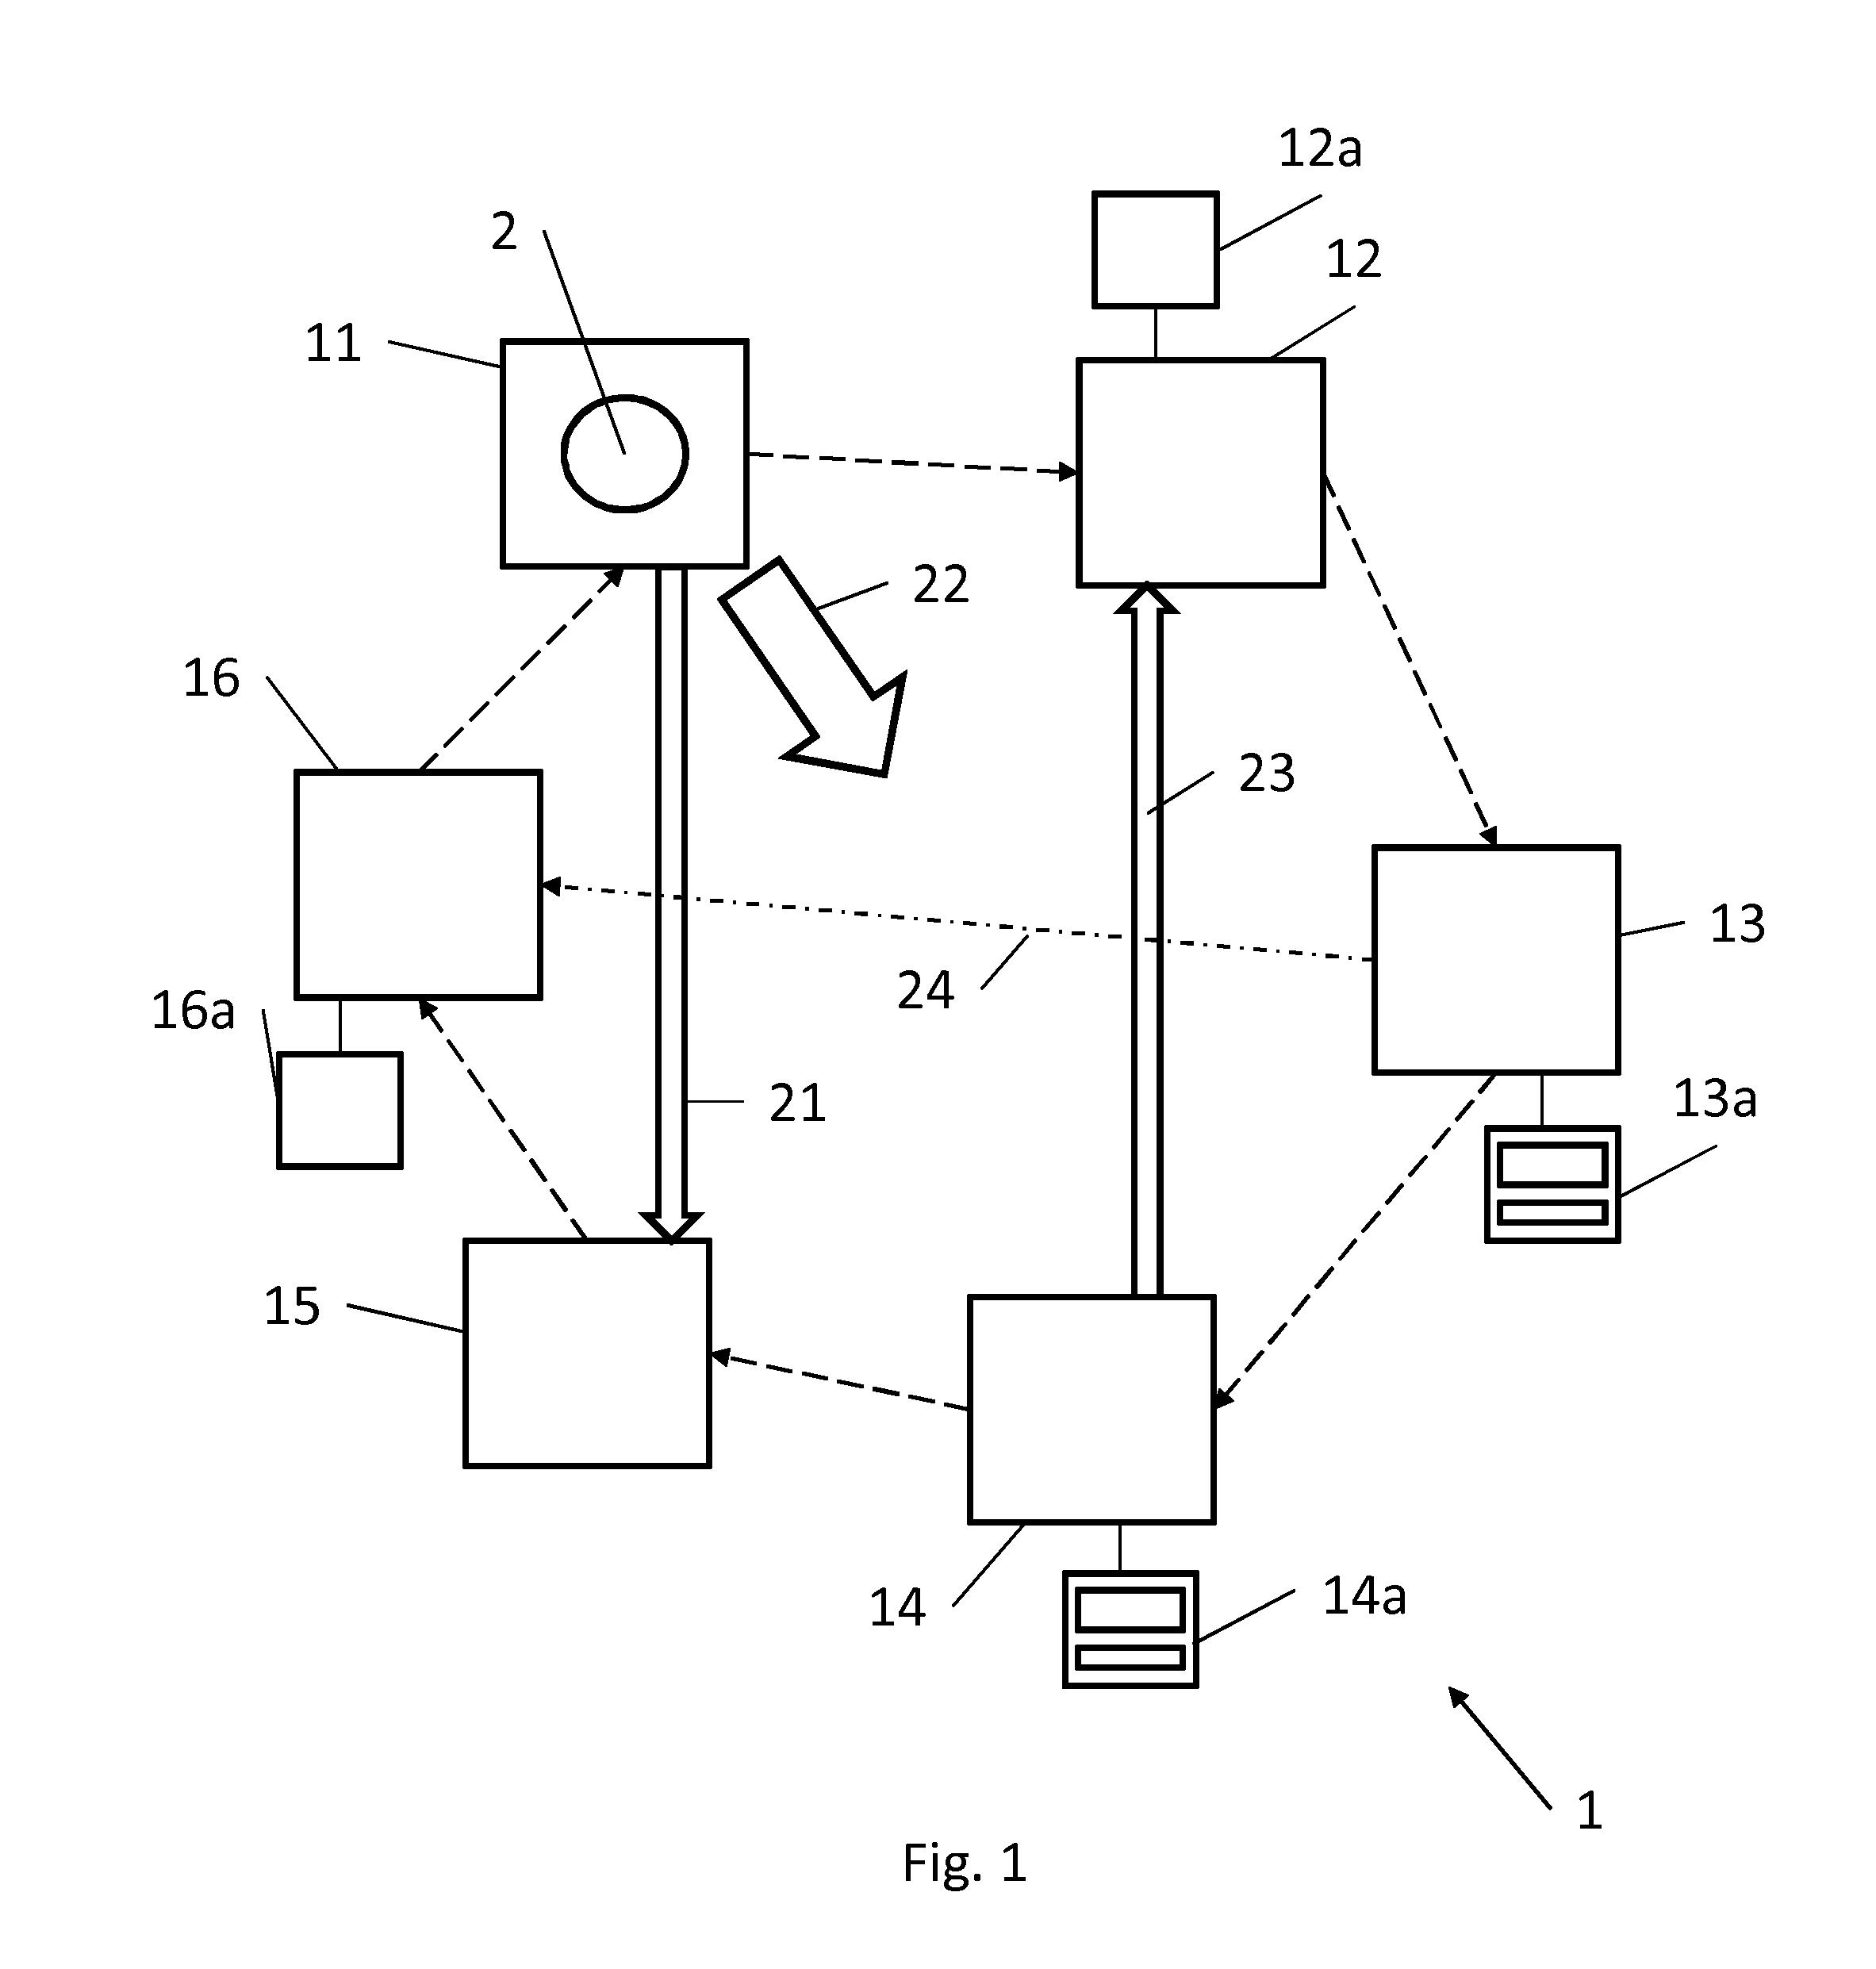 Methods and devices for communicating over a building management system network